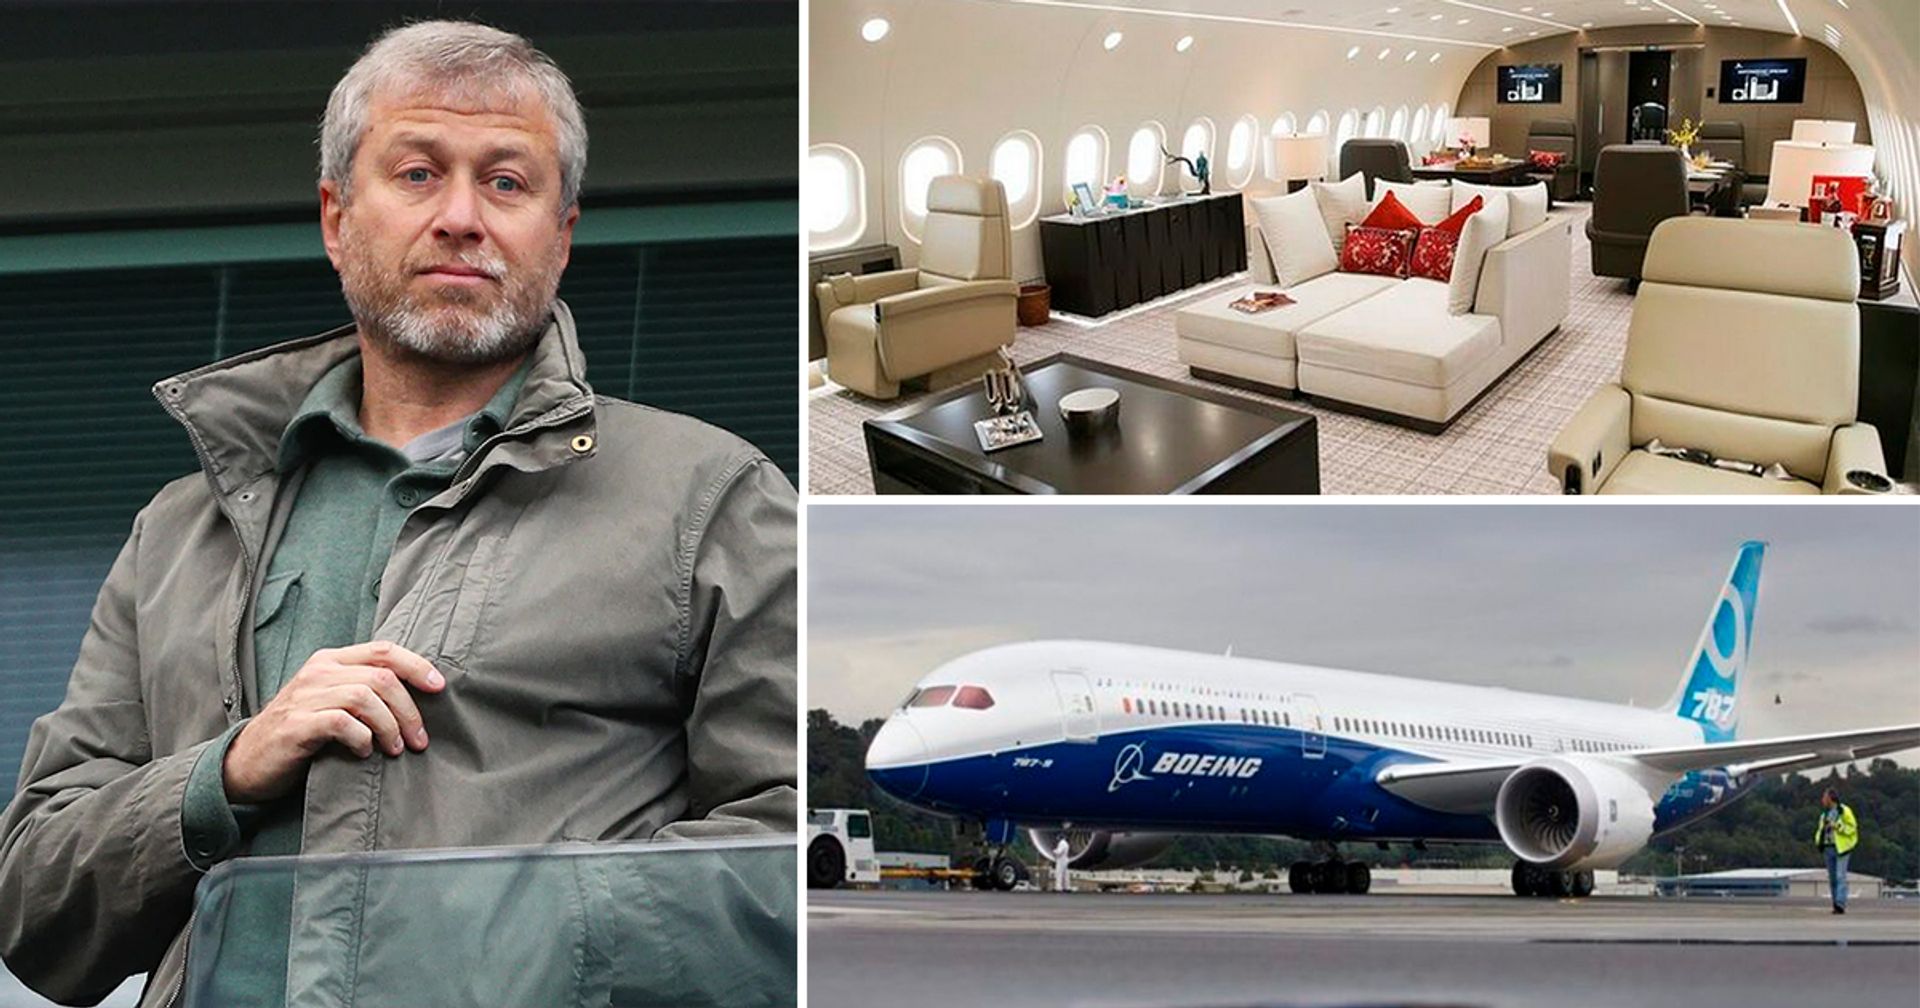 A look inside Abramovich's luxurious £270m private jet boasting bedrooms and kitchen